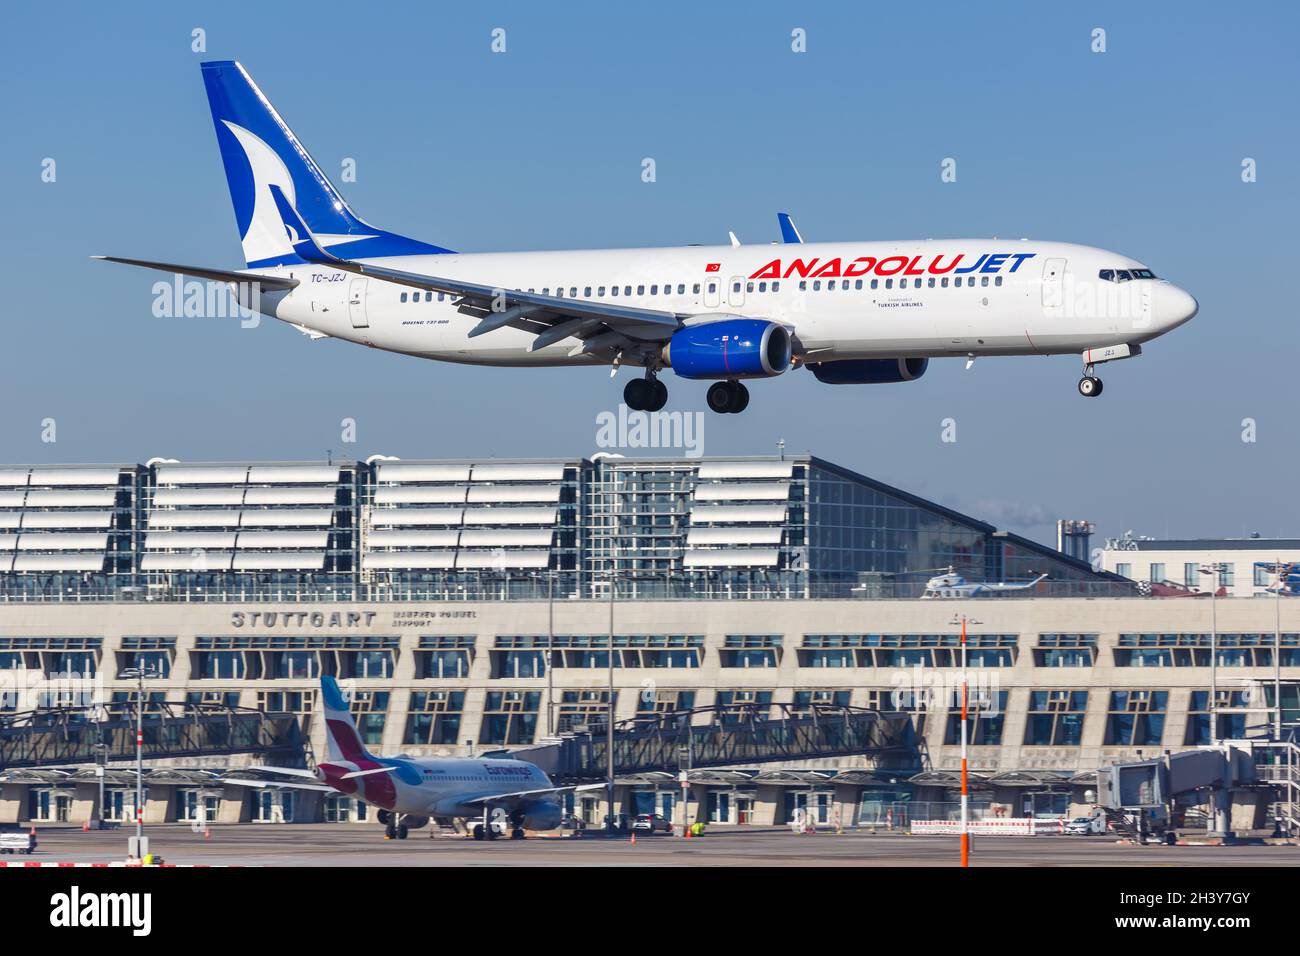 AnadoluJet Boeing 737-800 aircraft Stuttgart Airport in Germany Stock Photo